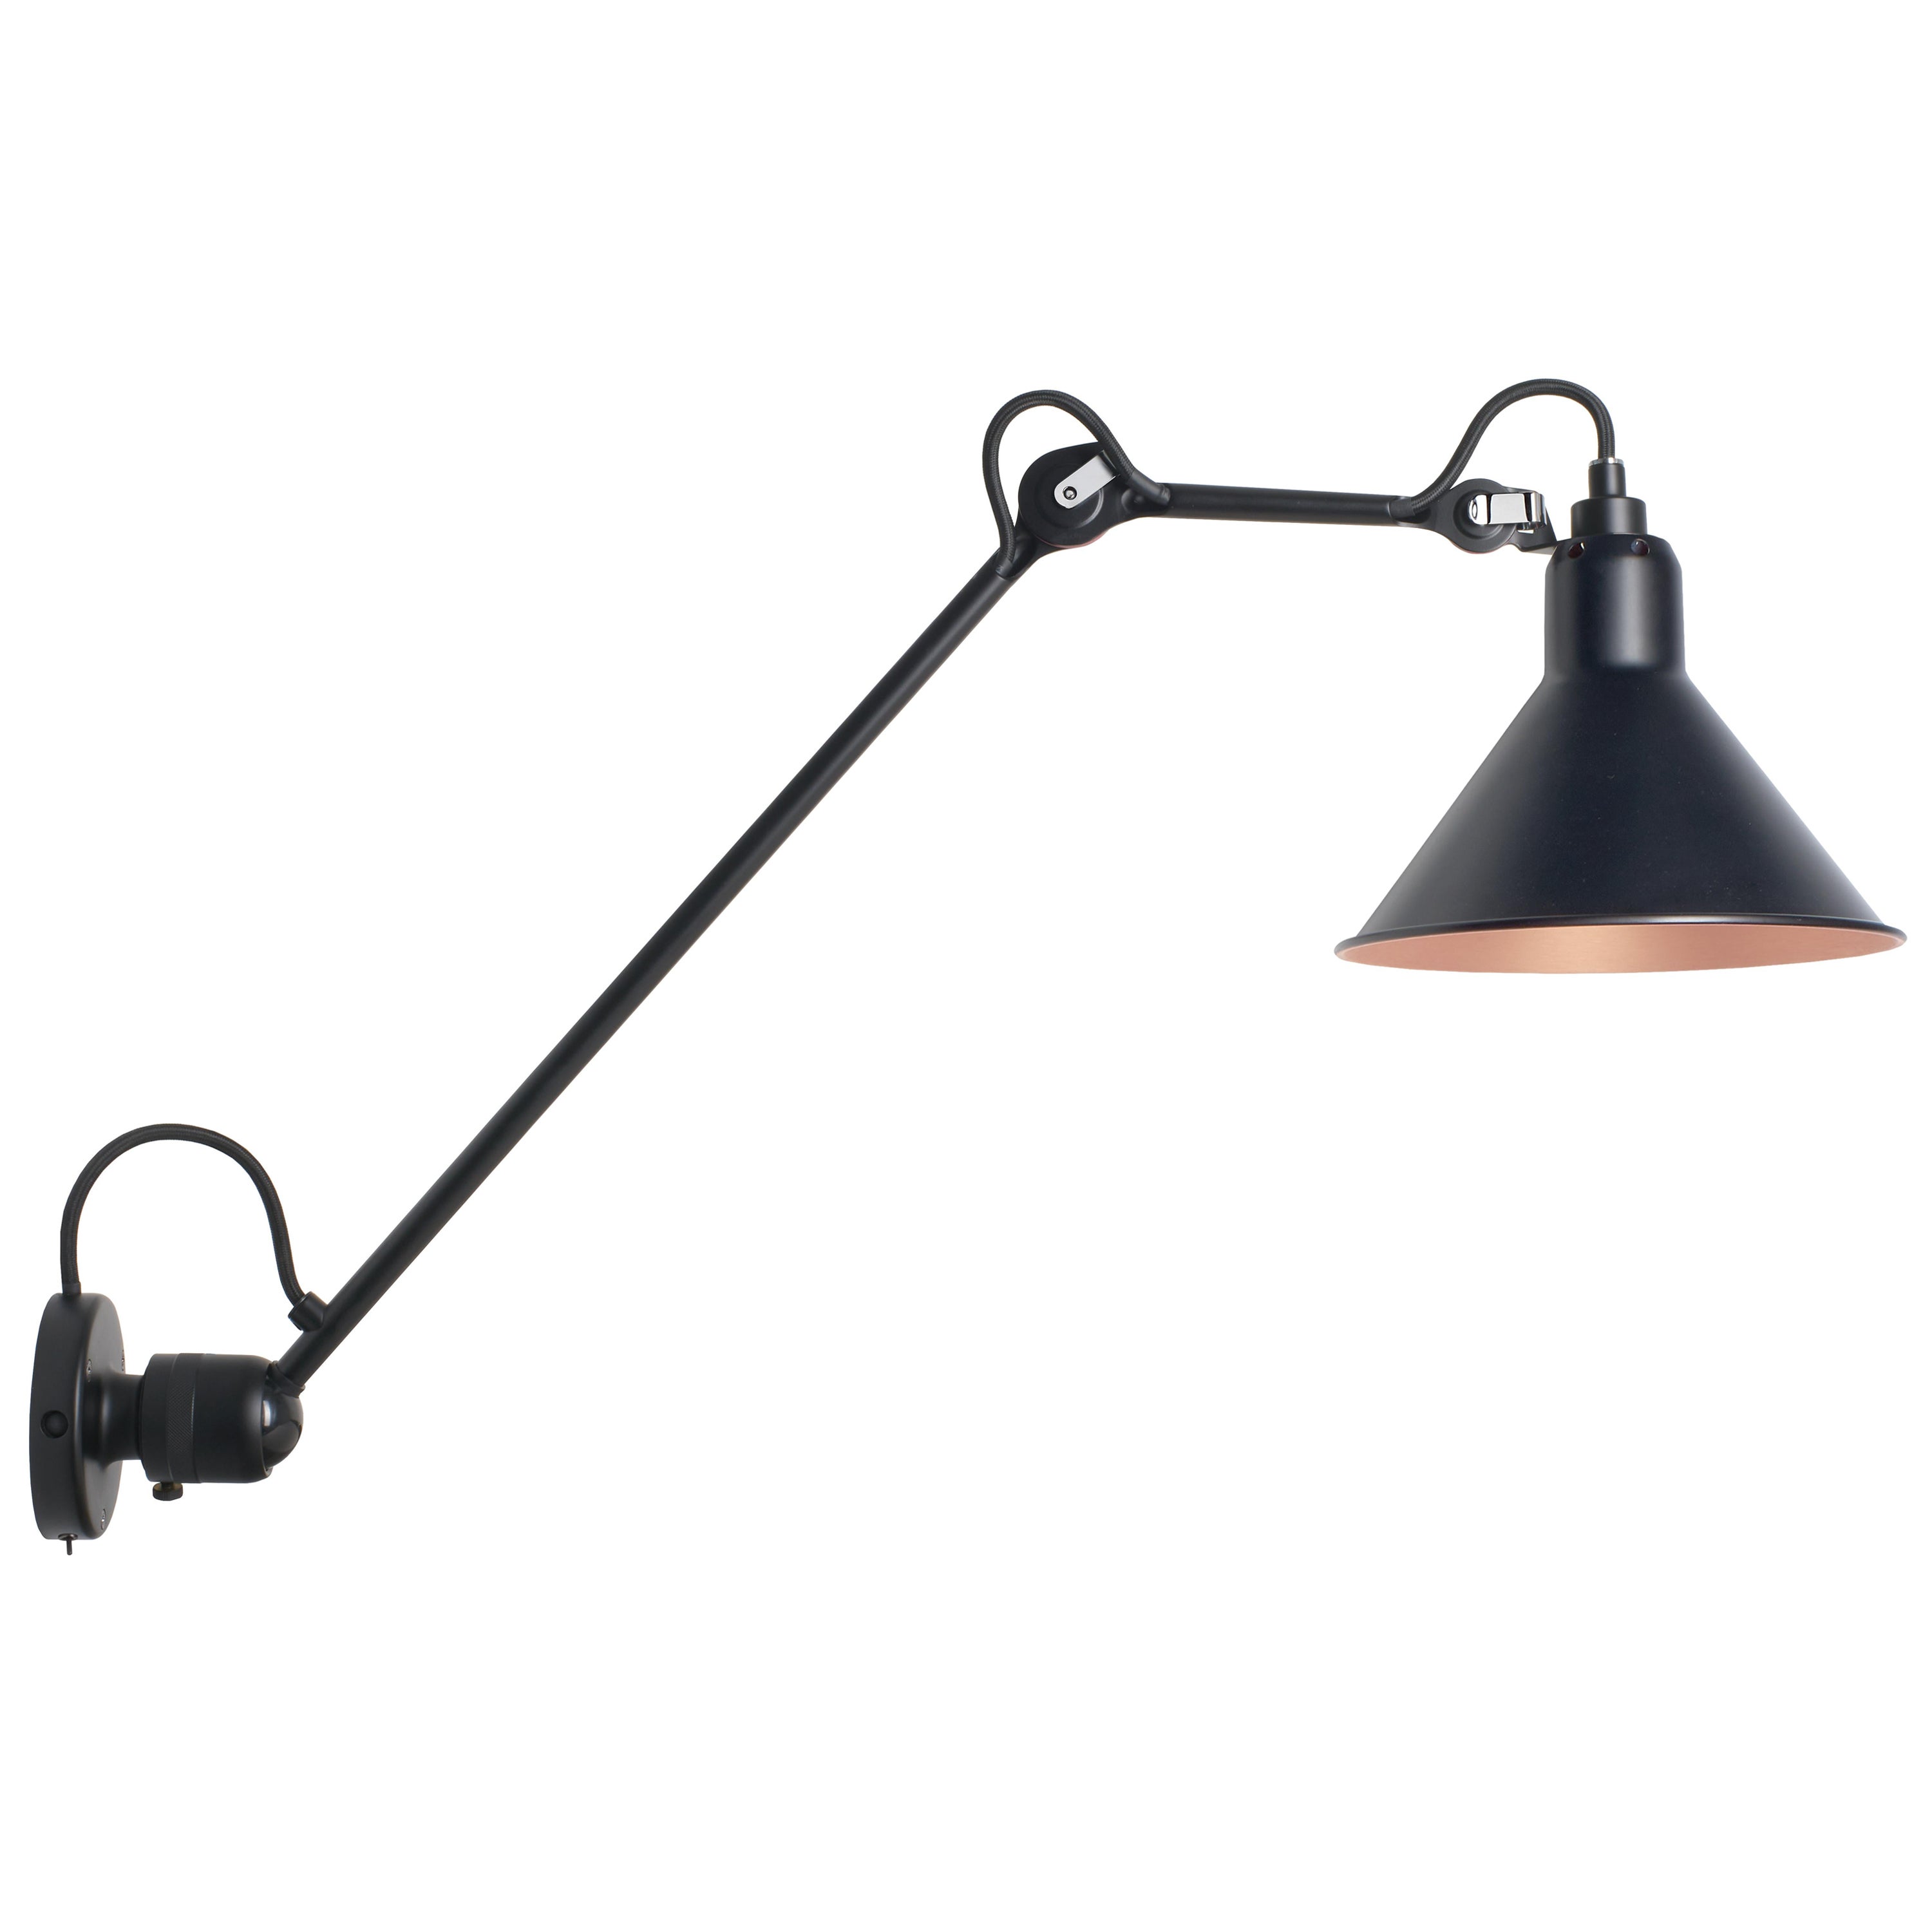 DCW Editions La Lampe Gras N°304 L40 SW Conic Wall Lamp in Black Copper Shade For Sale